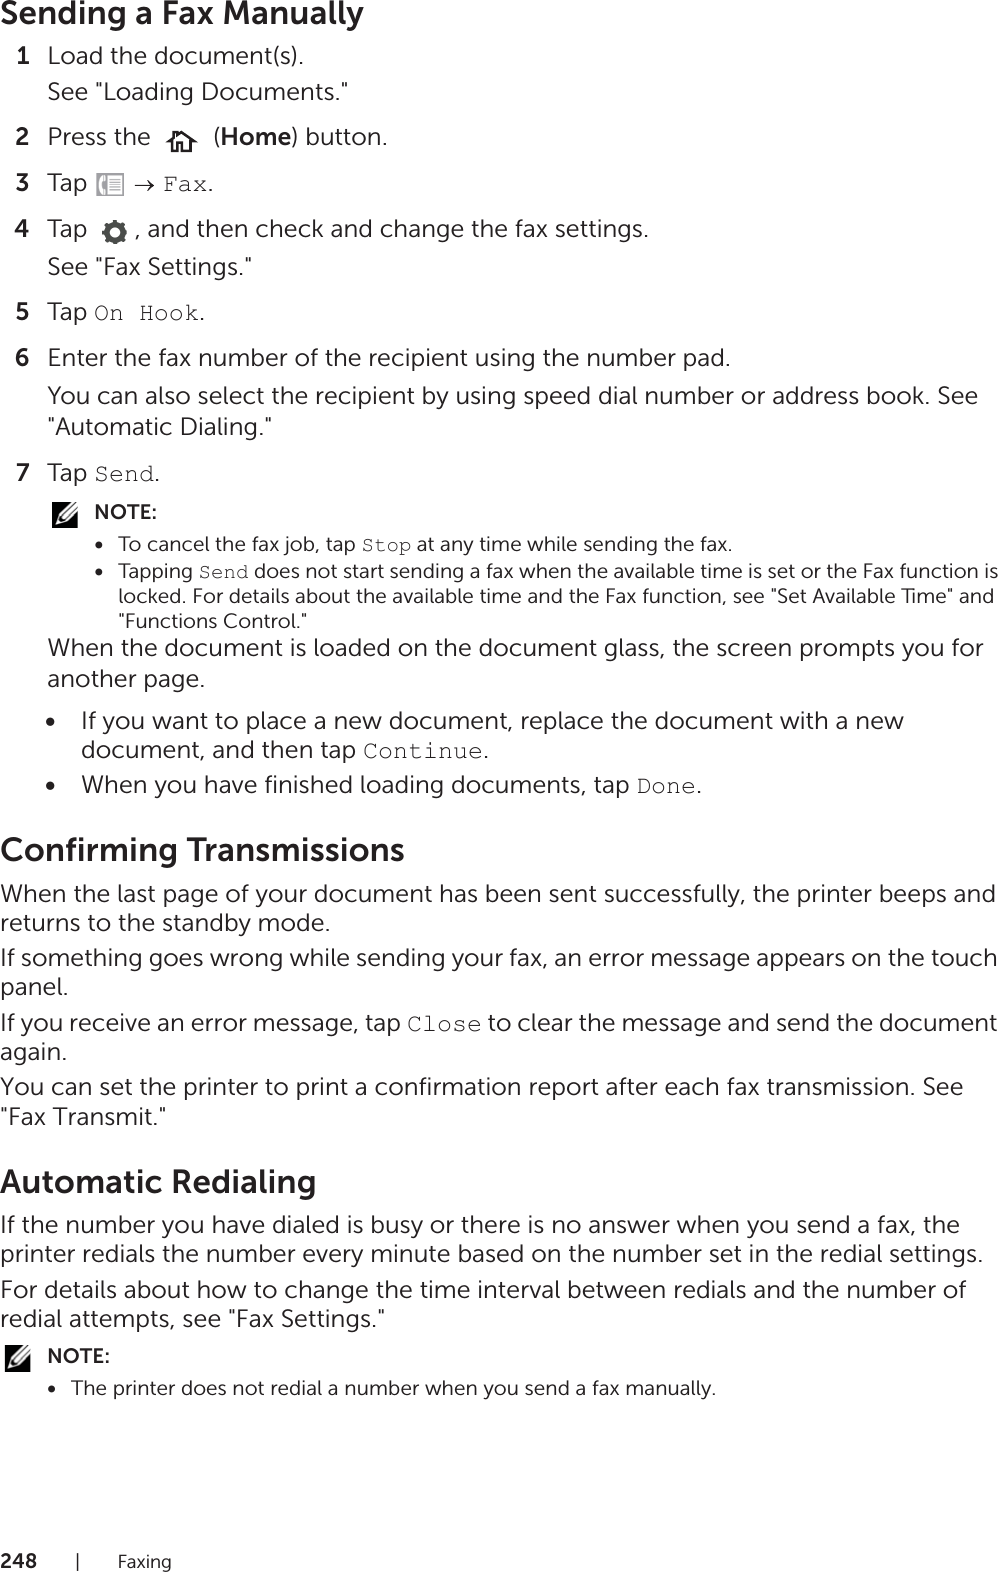 248|FaxingSending a Fax Manually1Load the document(s).See &quot;Loading Documents.&quot;2Press the   (Home) button.3Tap   Fax.4Tap  , and then check and change the fax settings.See &quot;Fax Settings.&quot;5Tap On Hook.6Enter the fax number of the recipient using the number pad.You can also select the recipient by using speed dial number or address book. See &quot;Automatic Dialing.&quot;7Tap Send.NOTE:•To cancel the fax job, tap Stop at any time while sending the fax.•Tapping Send does not start sending a fax when the available time is set or the Fax function is locked. For details about the available time and the Fax function, see &quot;Set Available Time&quot; and &quot;Functions Control.&quot;When the document is loaded on the document glass, the screen prompts you for another page.•If you want to place a new document, replace the document with a new document, and then tap Continue.•When you have finished loading documents, tap Done.Confirming TransmissionsWhen the last page of your document has been sent successfully, the printer beeps and returns to the standby mode.If something goes wrong while sending your fax, an error message appears on the touch panel.If you receive an error message, tap Close to clear the message and send the document again.You can set the printer to print a confirmation report after each fax transmission. See &quot;Fax Transmit.&quot;Automatic RedialingIf the number you have dialed is busy or there is no answer when you send a fax, the printer redials the number every minute based on the number set in the redial settings.For details about how to change the time interval between redials and the number of redial attempts, see &quot;Fax Settings.&quot;NOTE:•The printer does not redial a number when you send a fax manually.